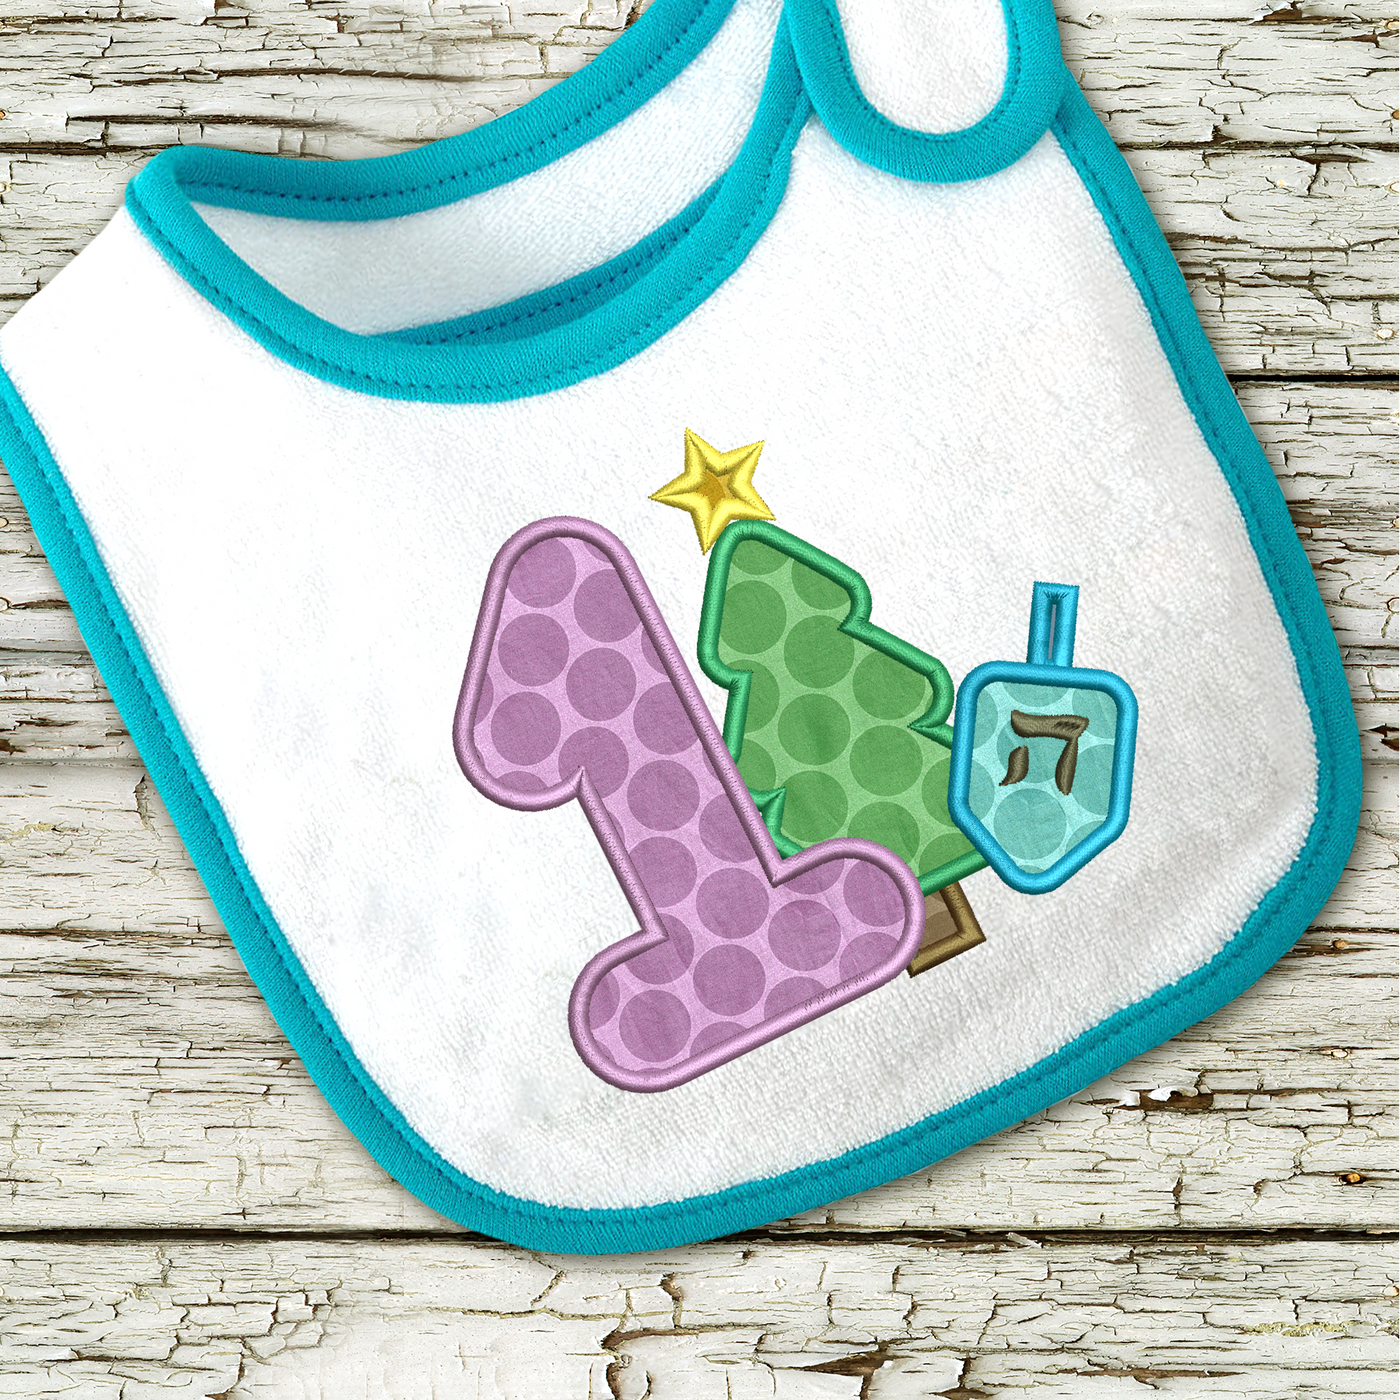 Bib with applique design of a large 1 and a Christmas tree and dreidel.